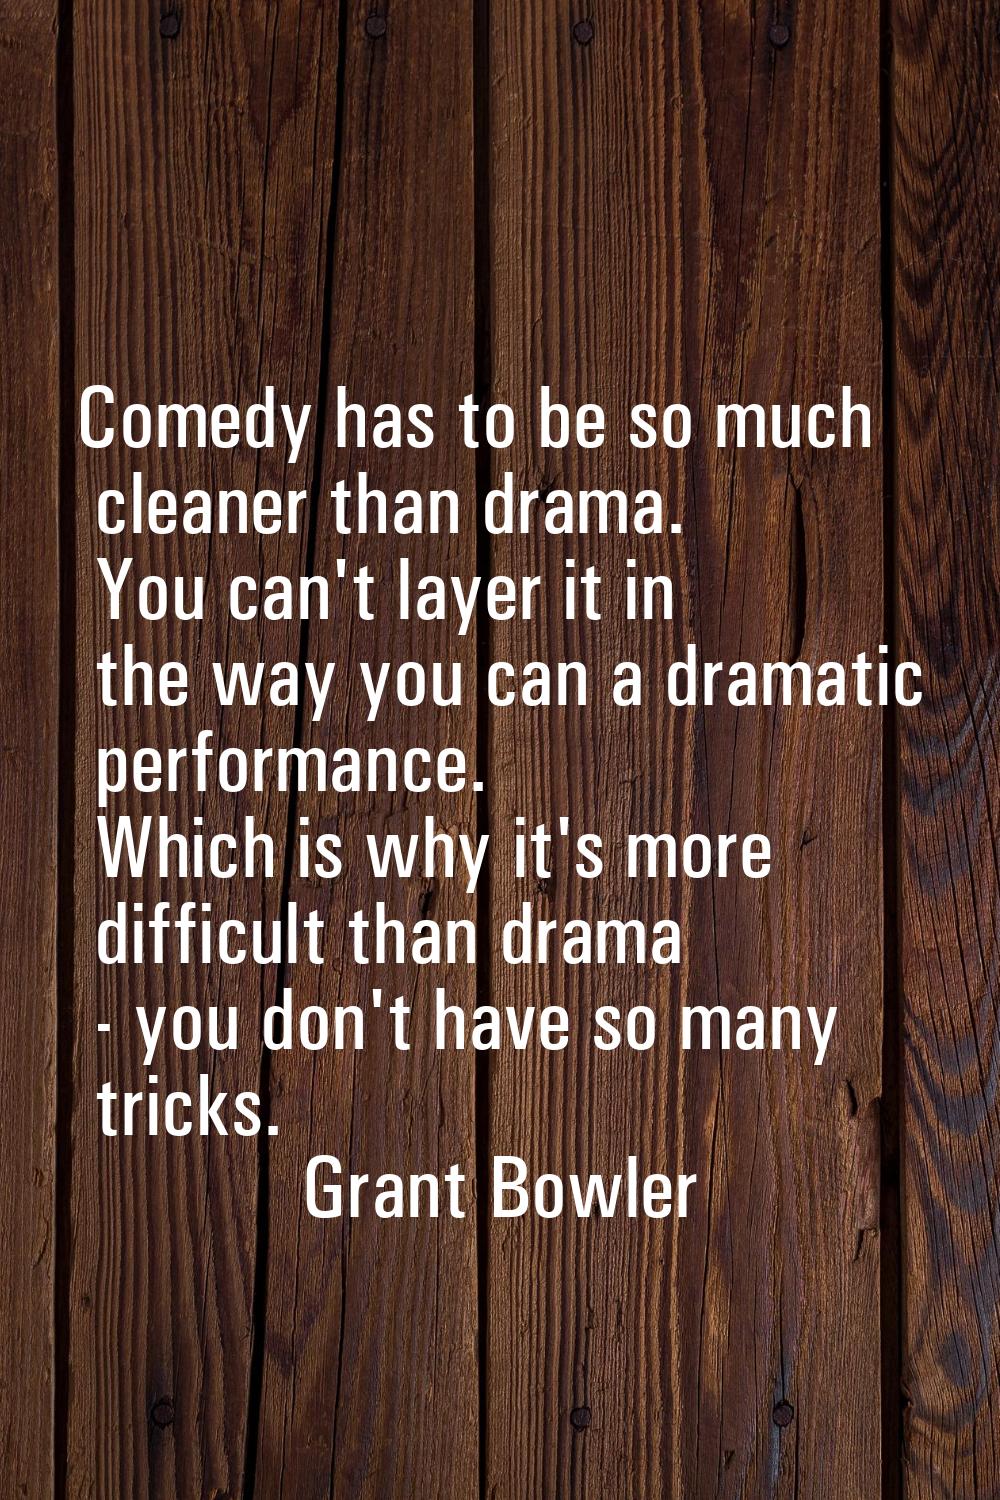 Comedy has to be so much cleaner than drama. You can't layer it in the way you can a dramatic perfo